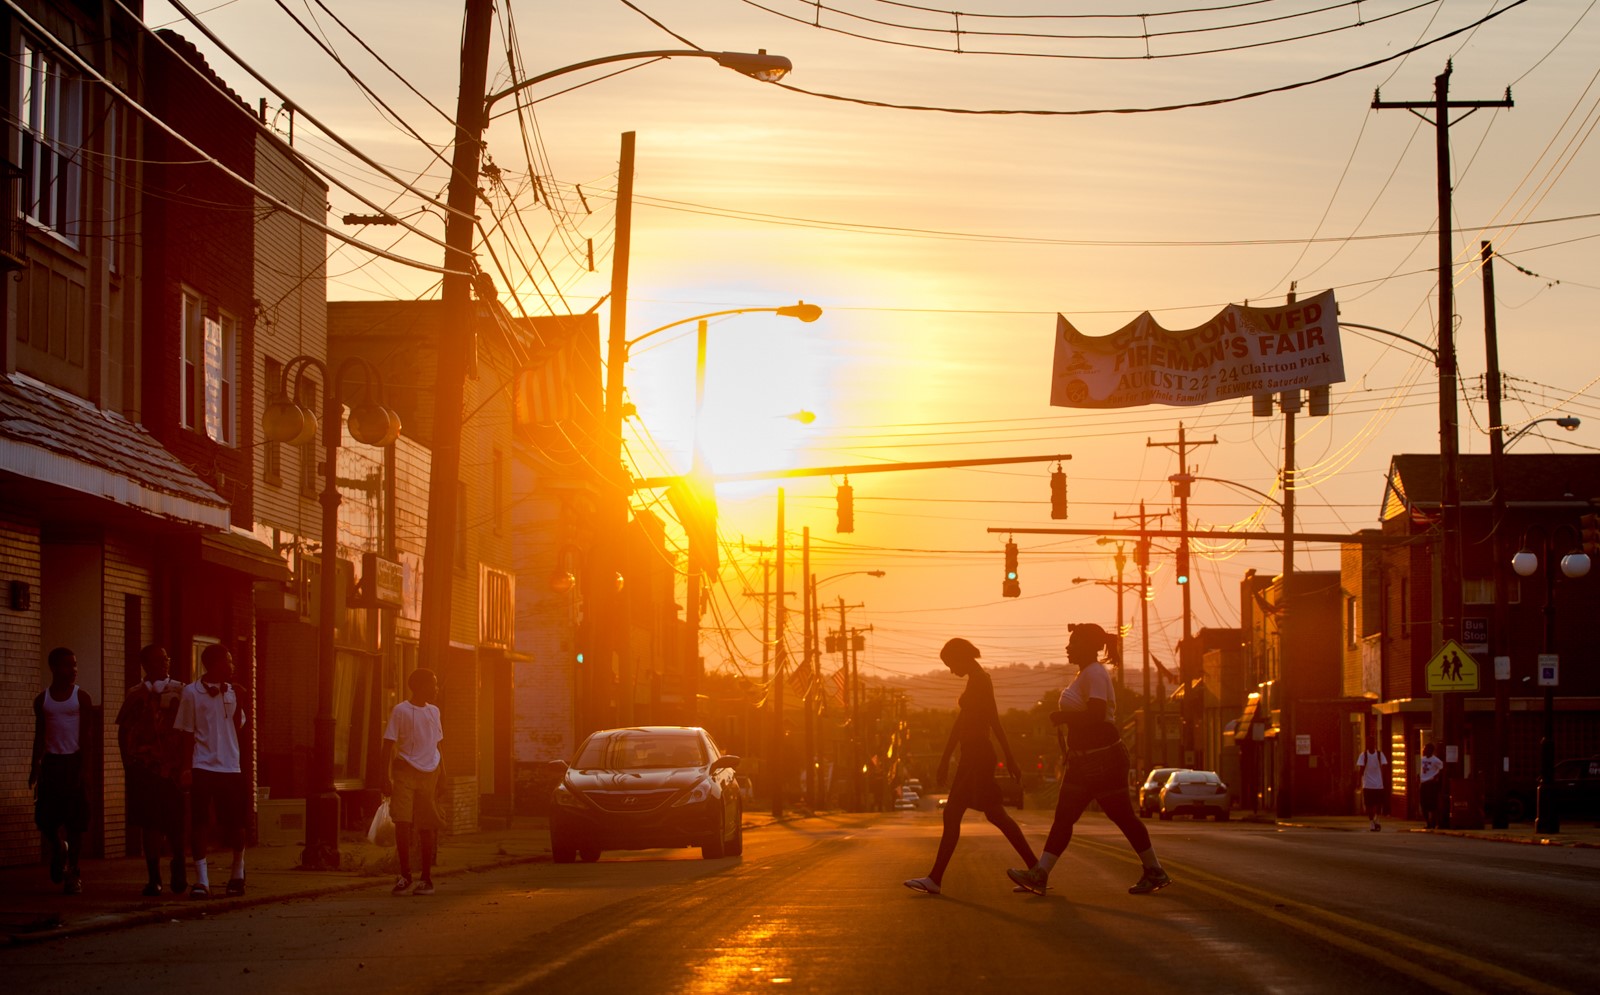 The sun sets on two silhouettes crossing a road.